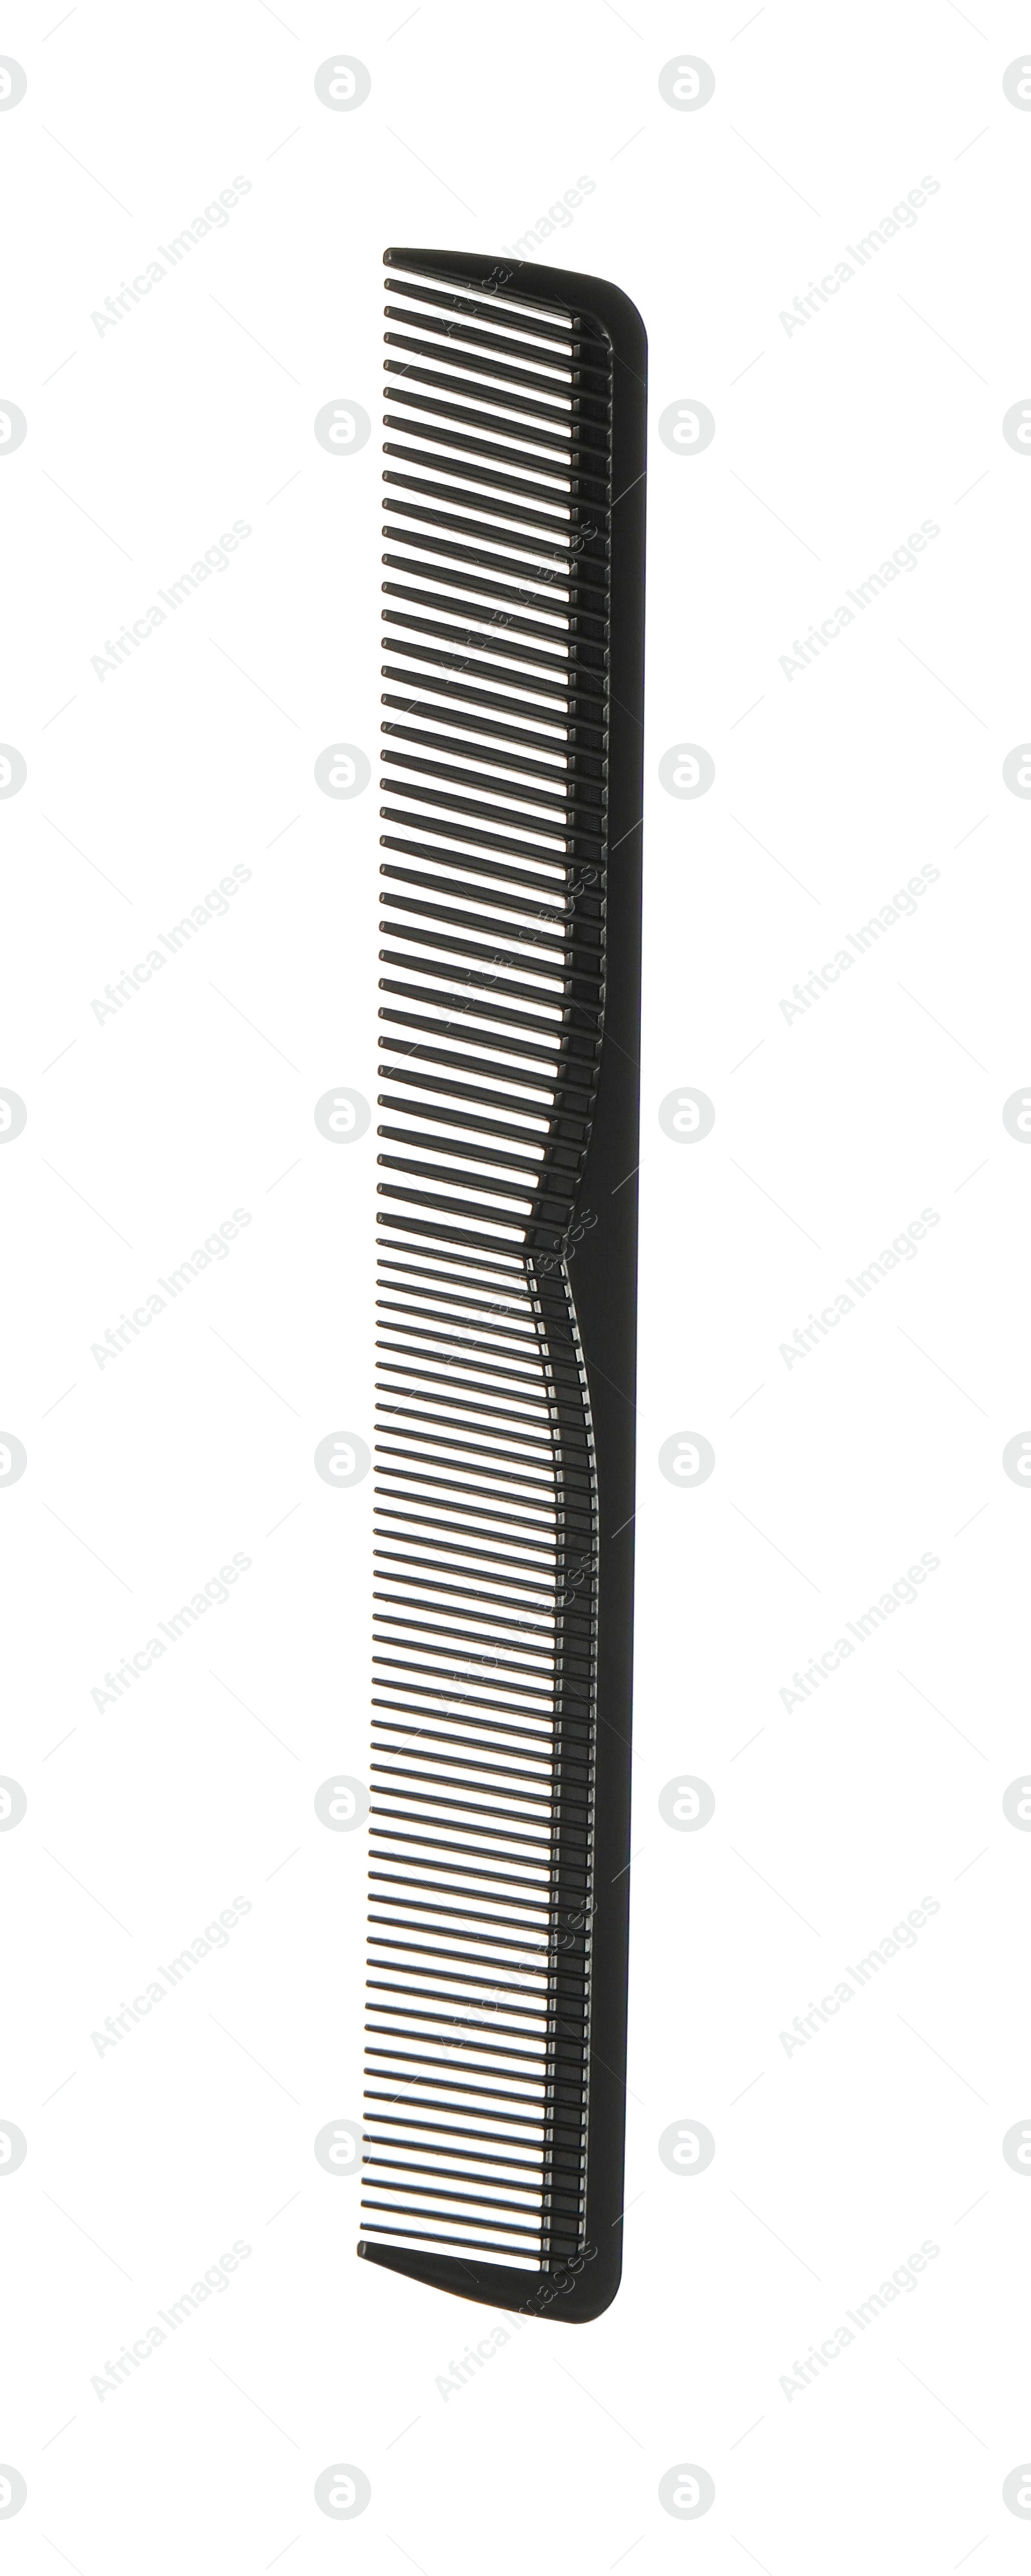 Photo of Hairdresser tool. Black hair comb isolated on white